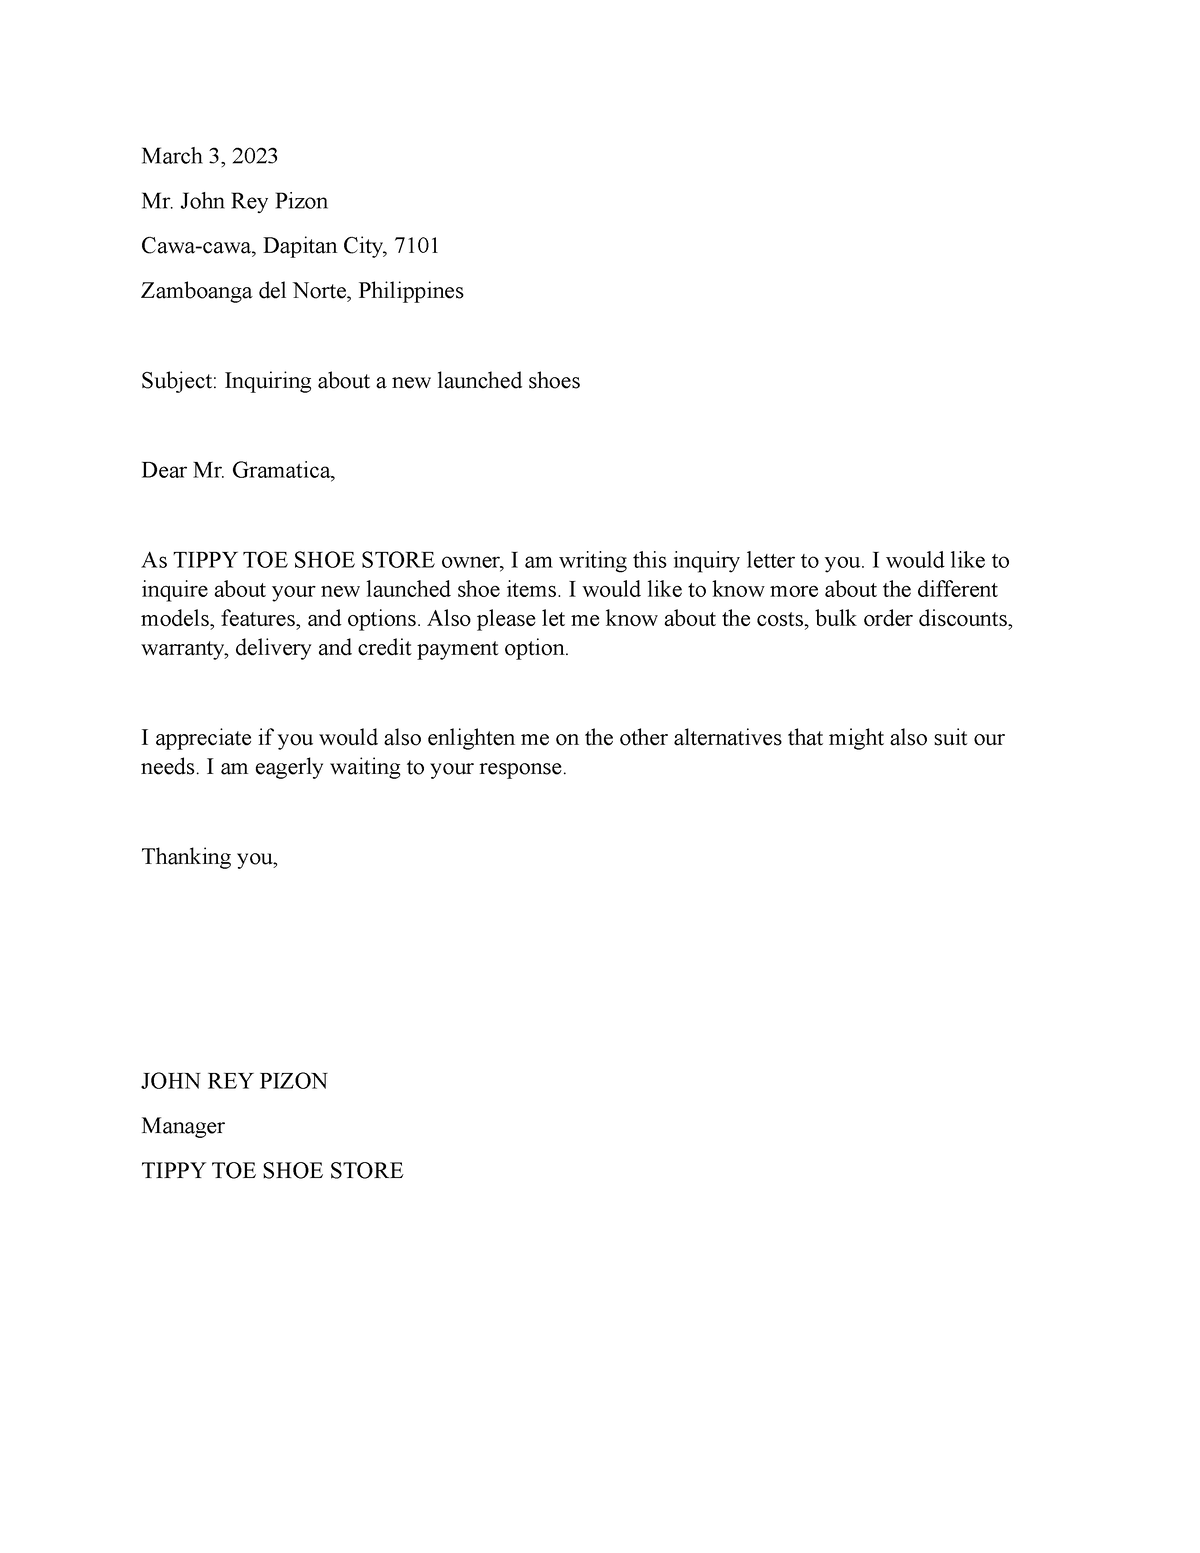 Inquiry Letter for purchase - March 3, 2023 Mr. John Rey Pizon Cawa ...